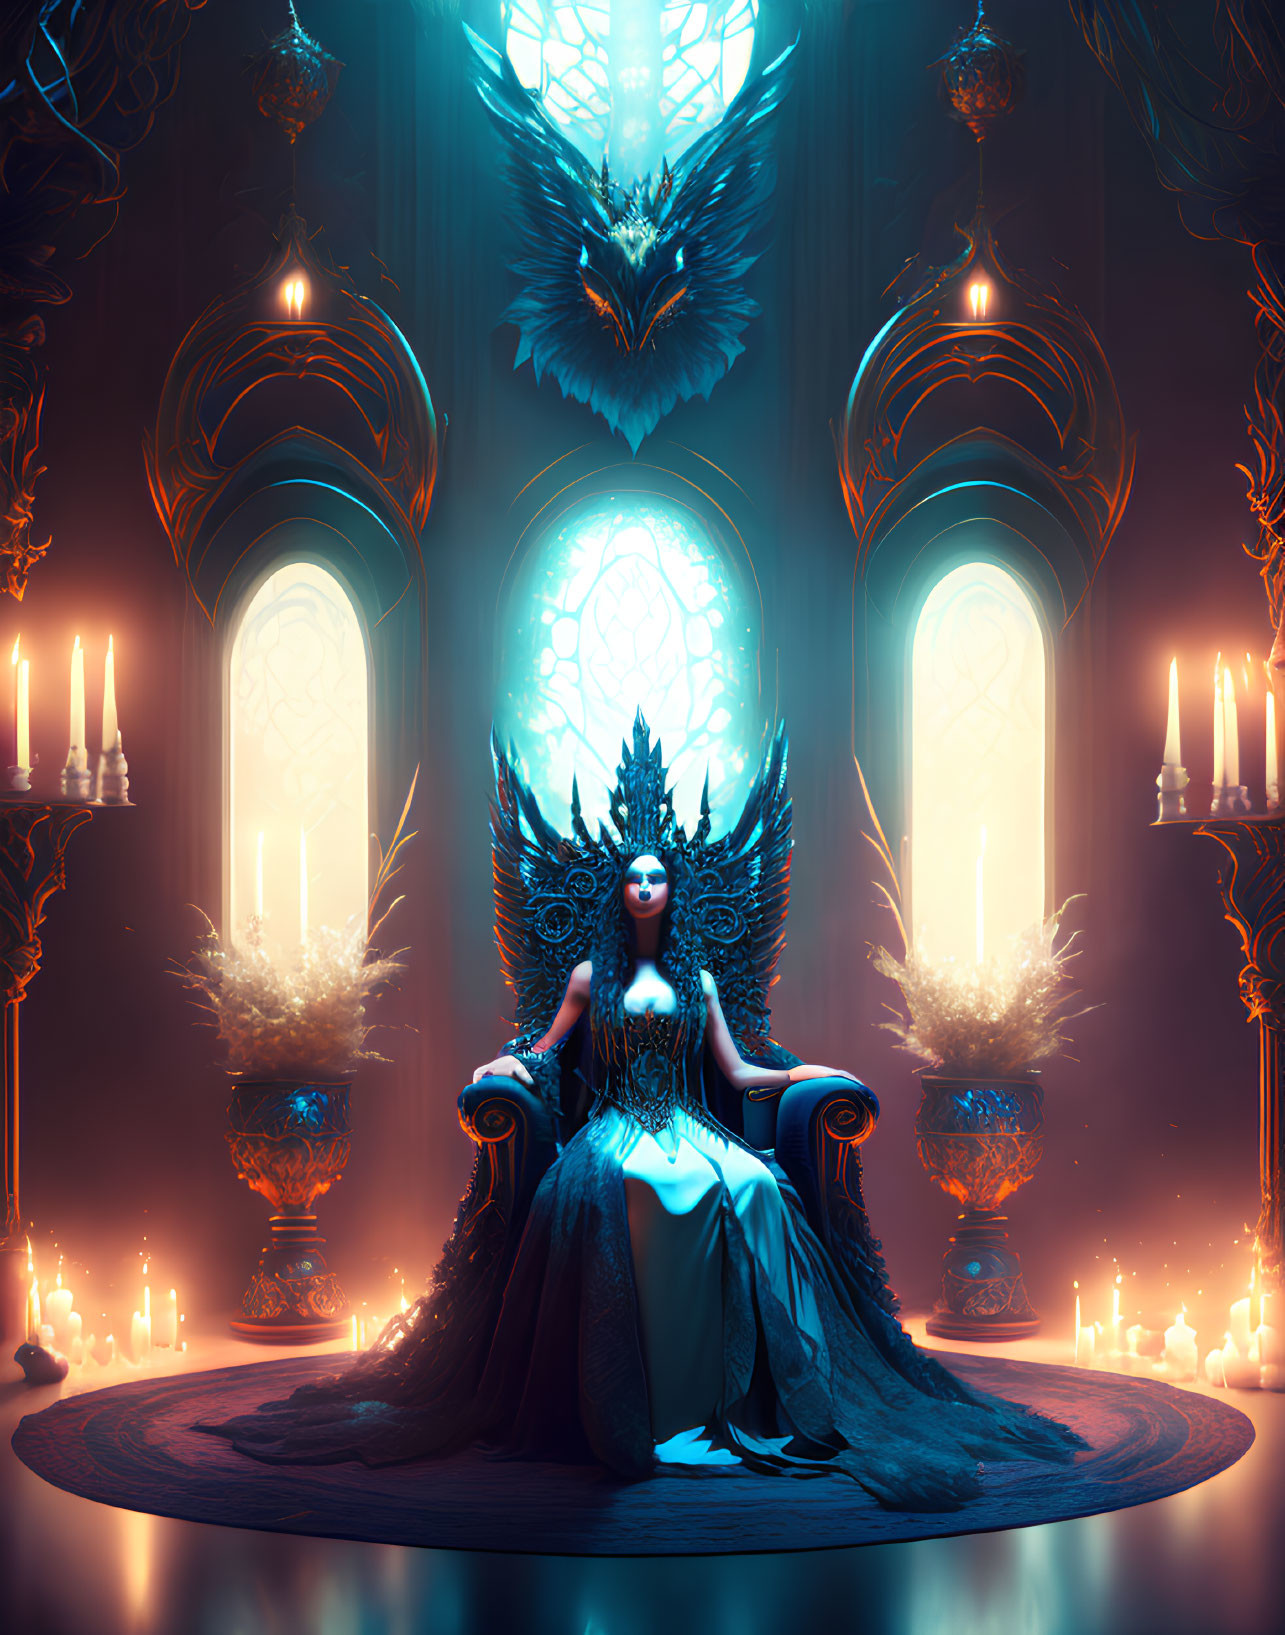 Majestic figure with dark wings on throne in gothic hall with candles